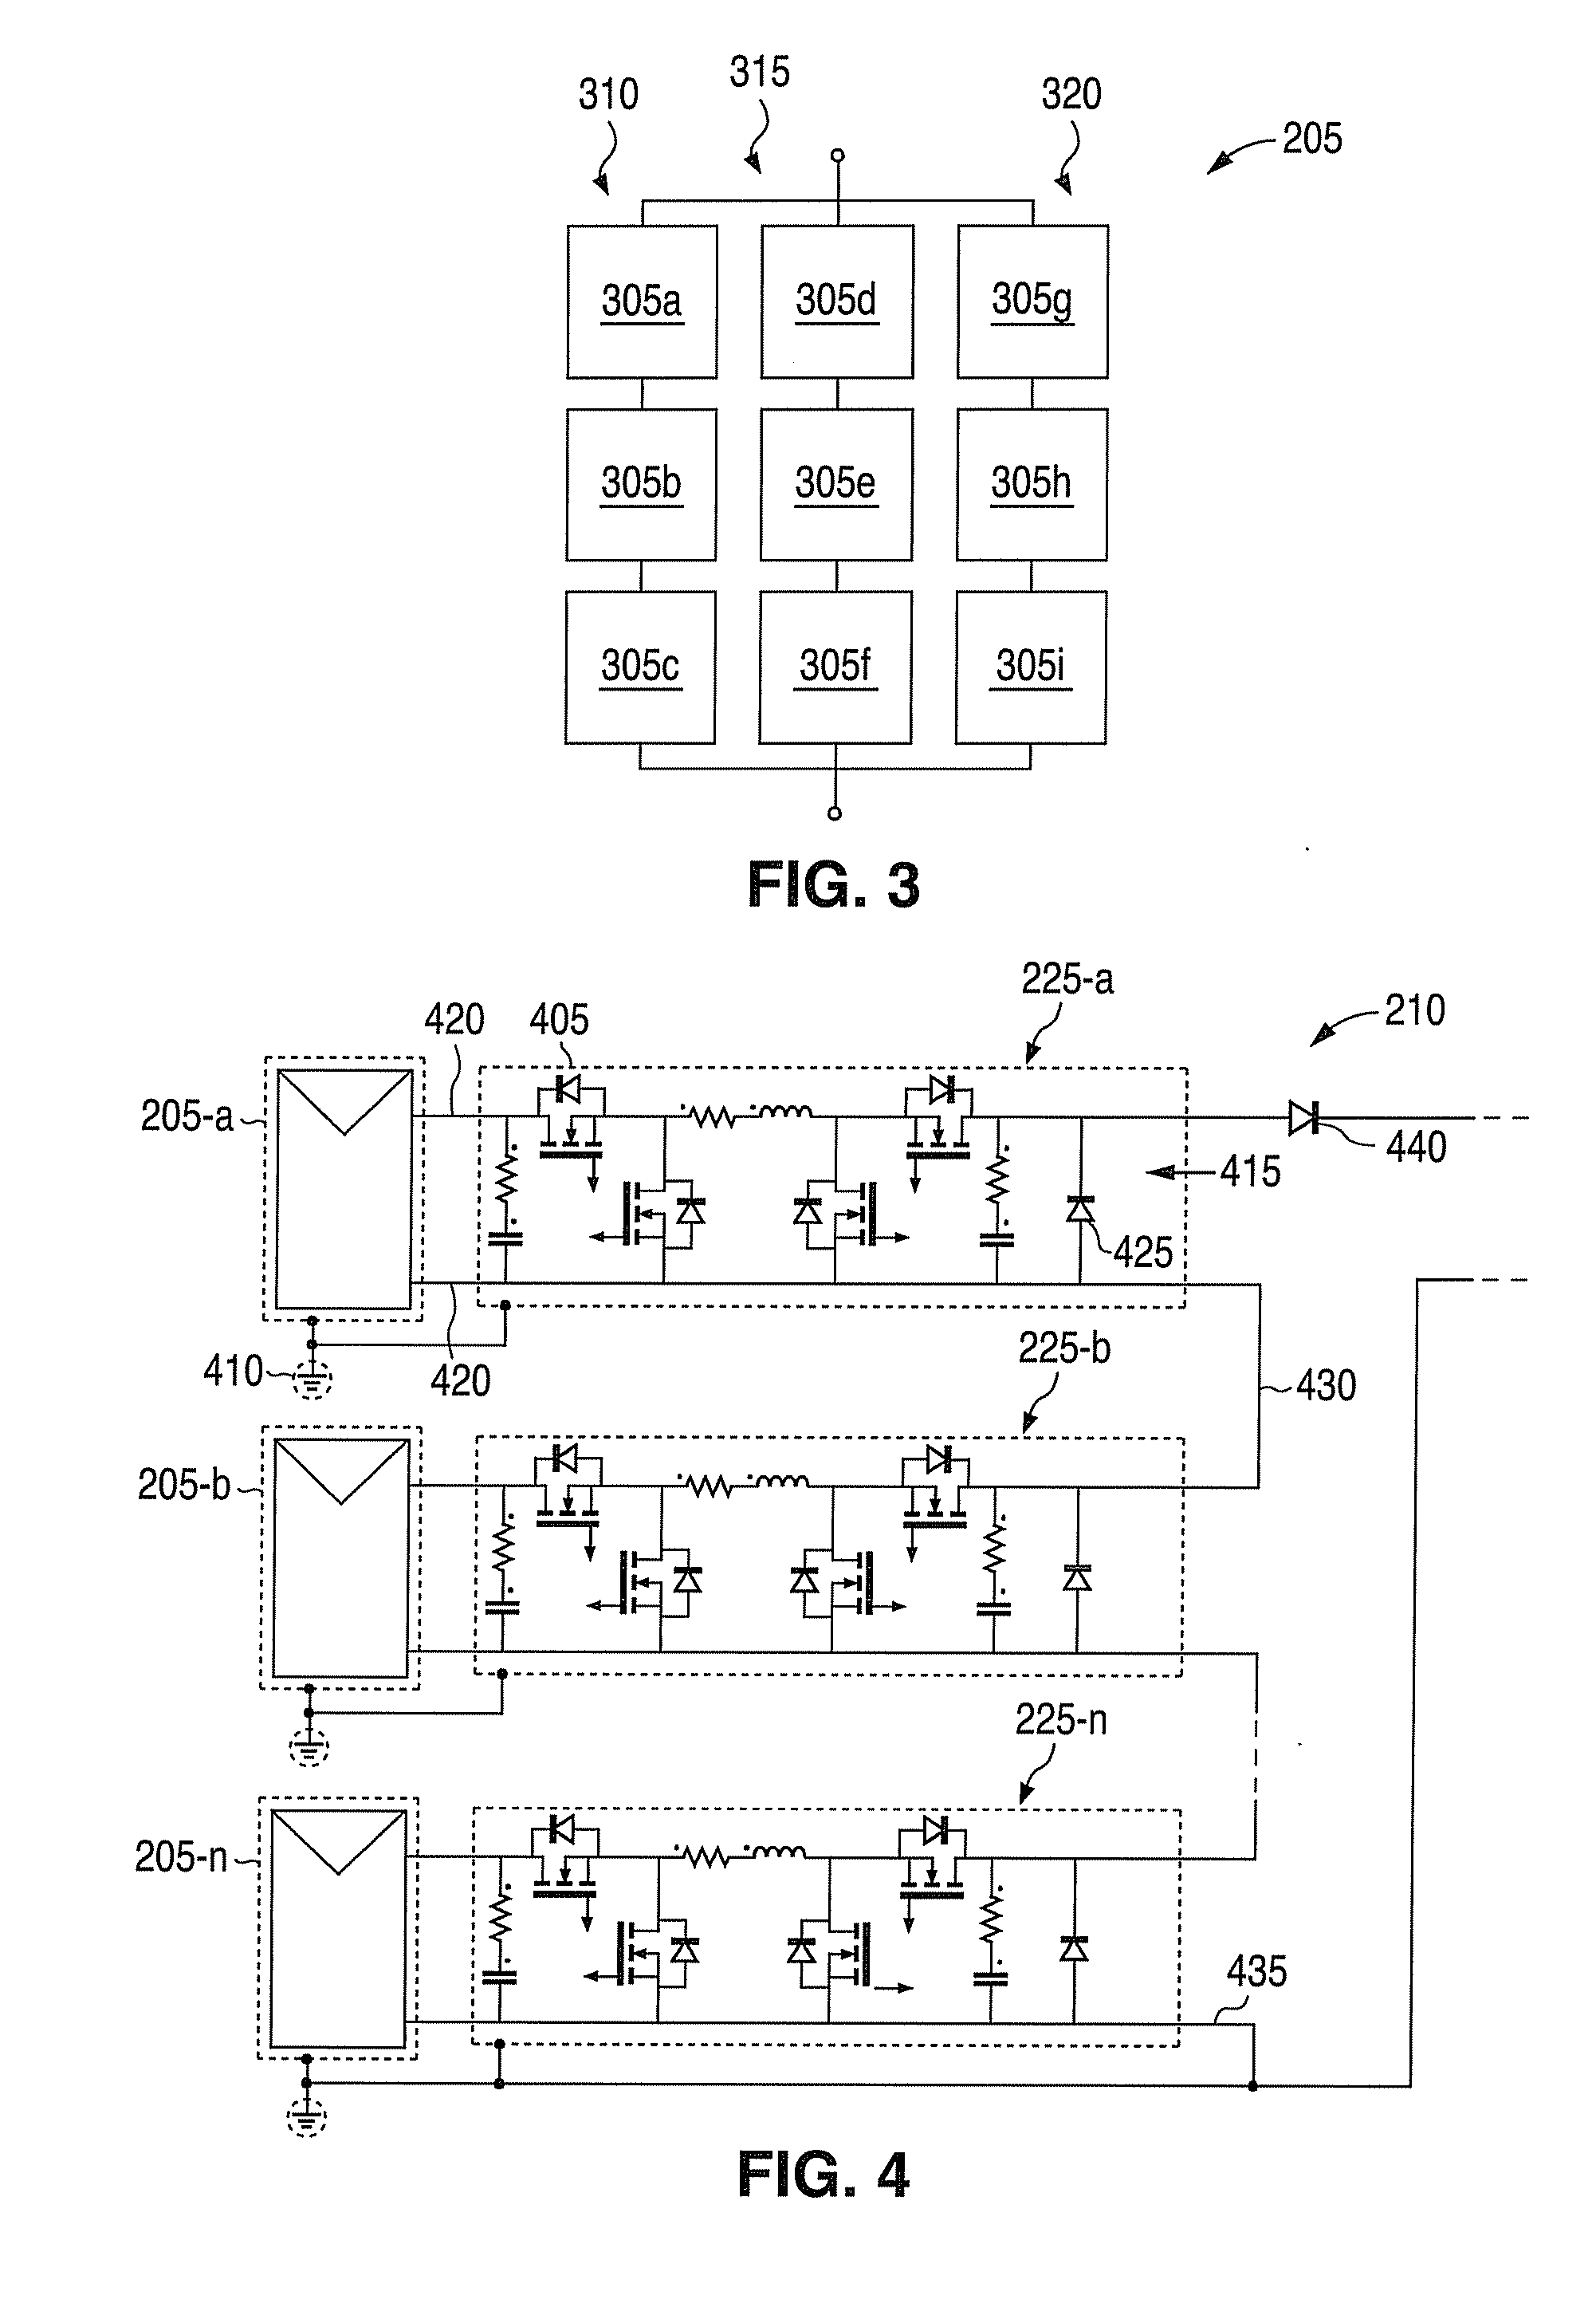 System and method for over-Voltage protection of a photovoltaic string with distributed maximum power point tracking